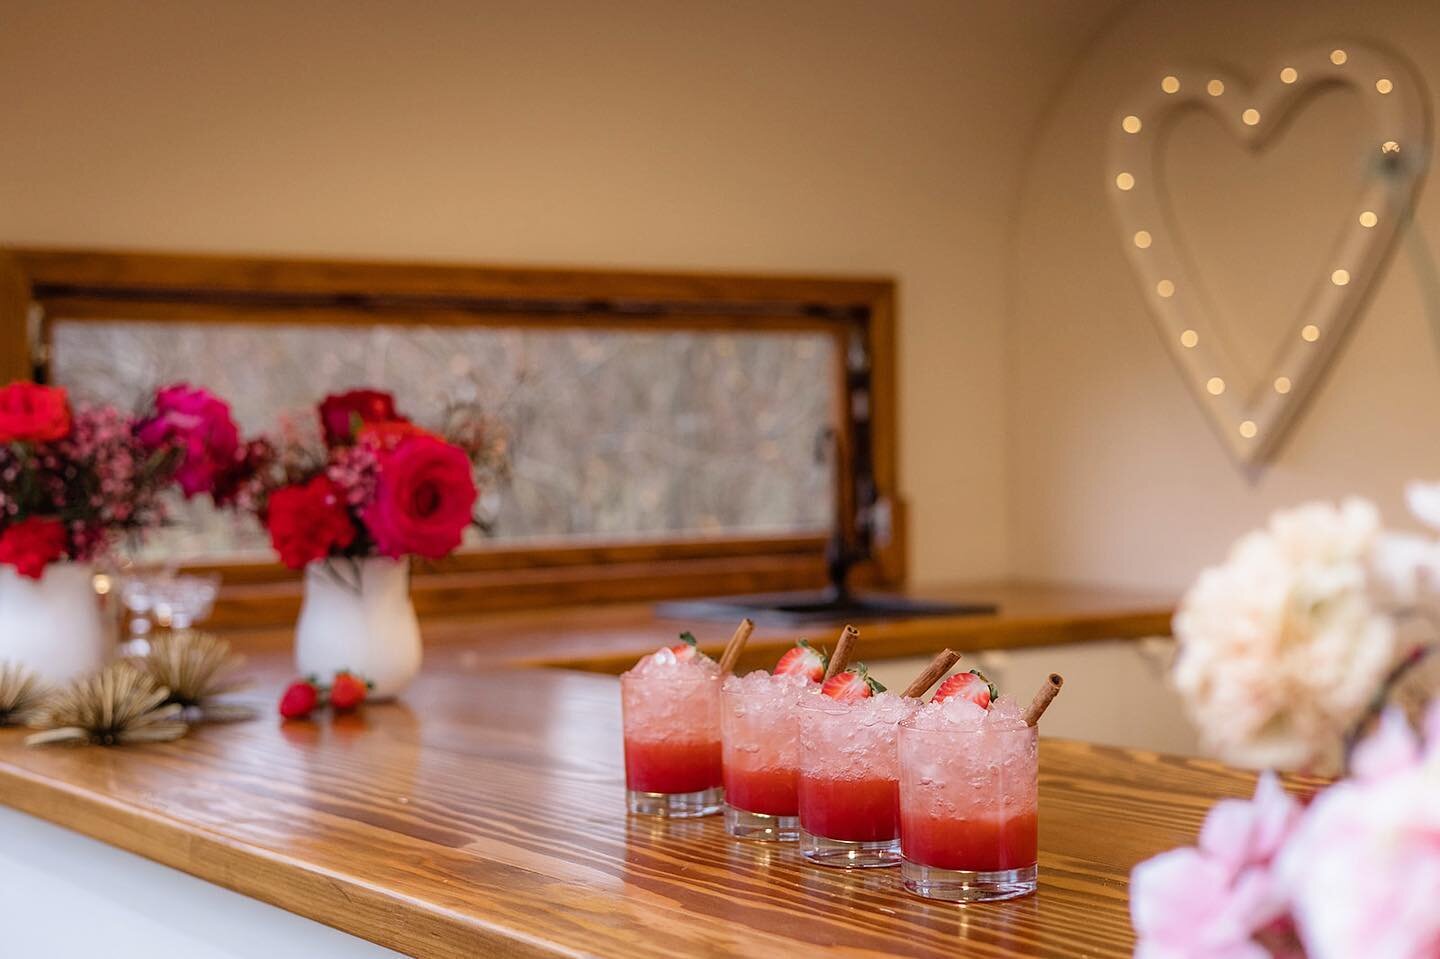 Happy Friday friends!

Let&rsquo;s talk SIGNATURE COCKTAILS!!! 

Signature cocktails are a fabulous way to personalize your wedding, shower, birthday or brand into an event They are a great way to inject beauty through colour and aesthetic as well as